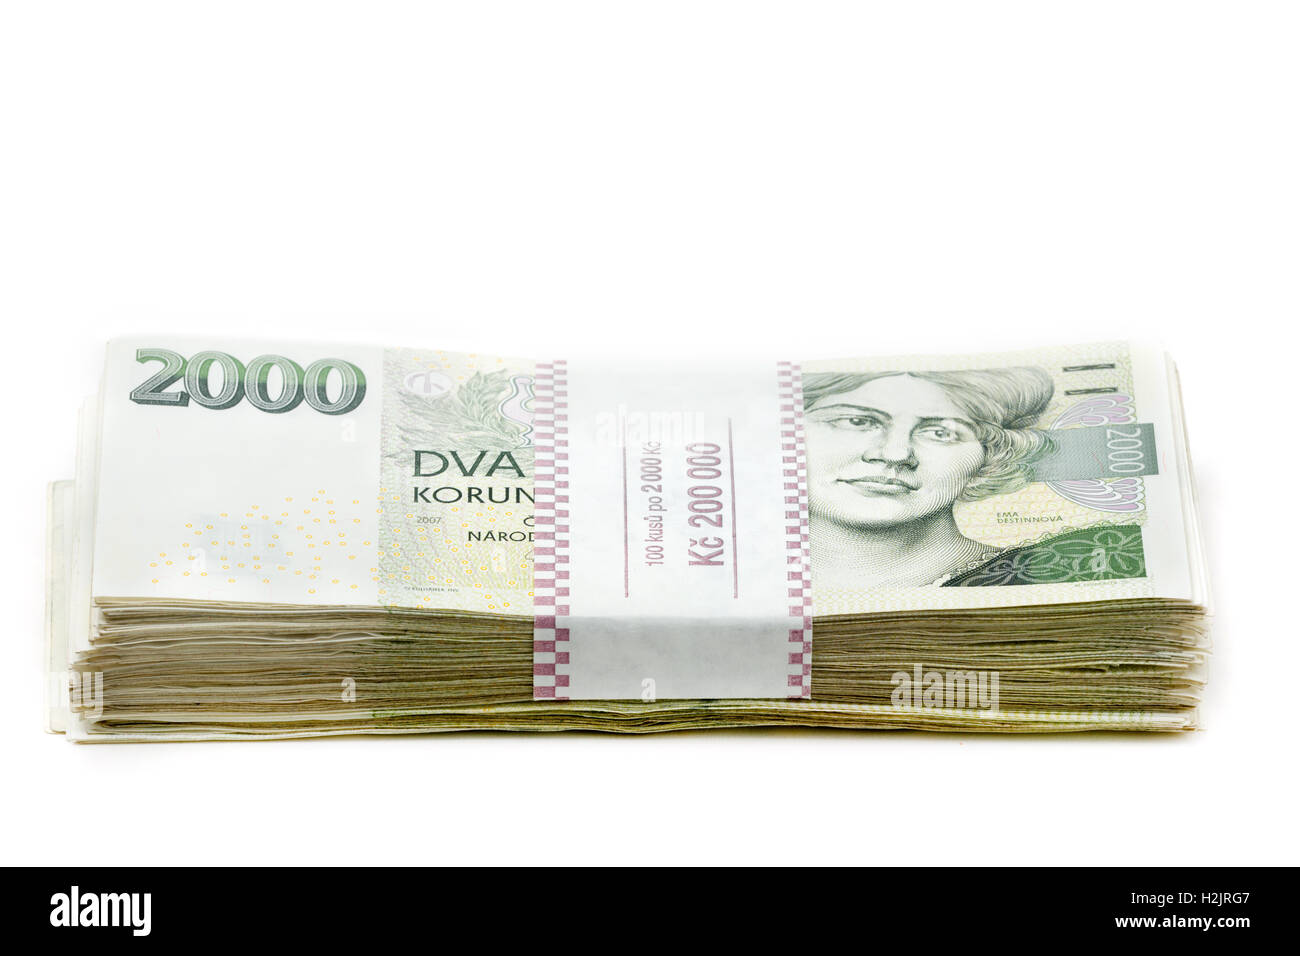 czech banknotes nominal value two and five thousand crowns on white background. 200 000 Kc is approximately 8 300 US dollars (US Stock Photo